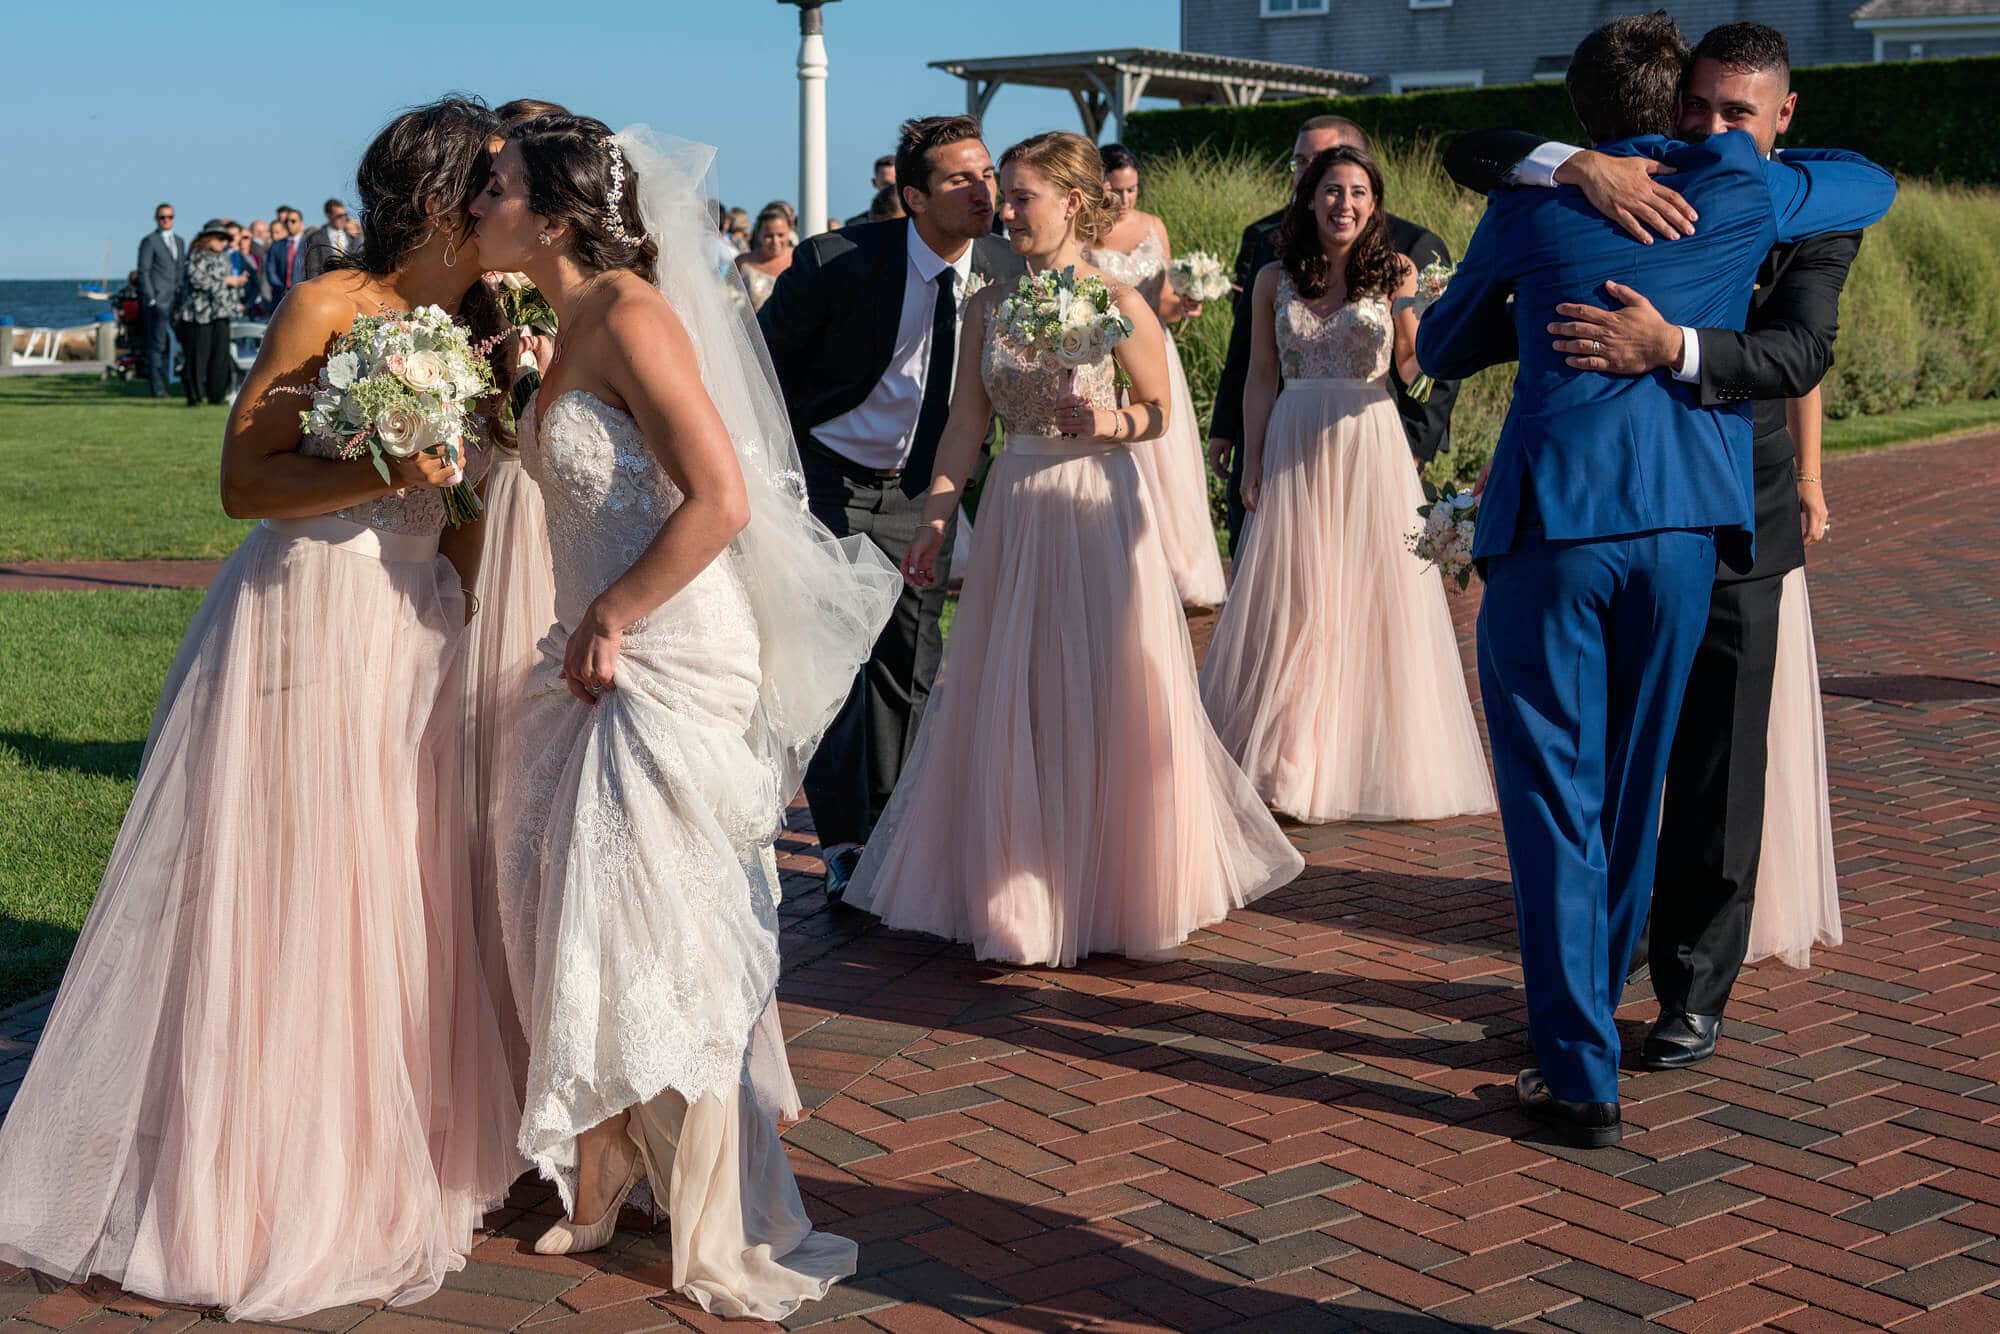 hugs after wedding ceremony at wychmere beach club